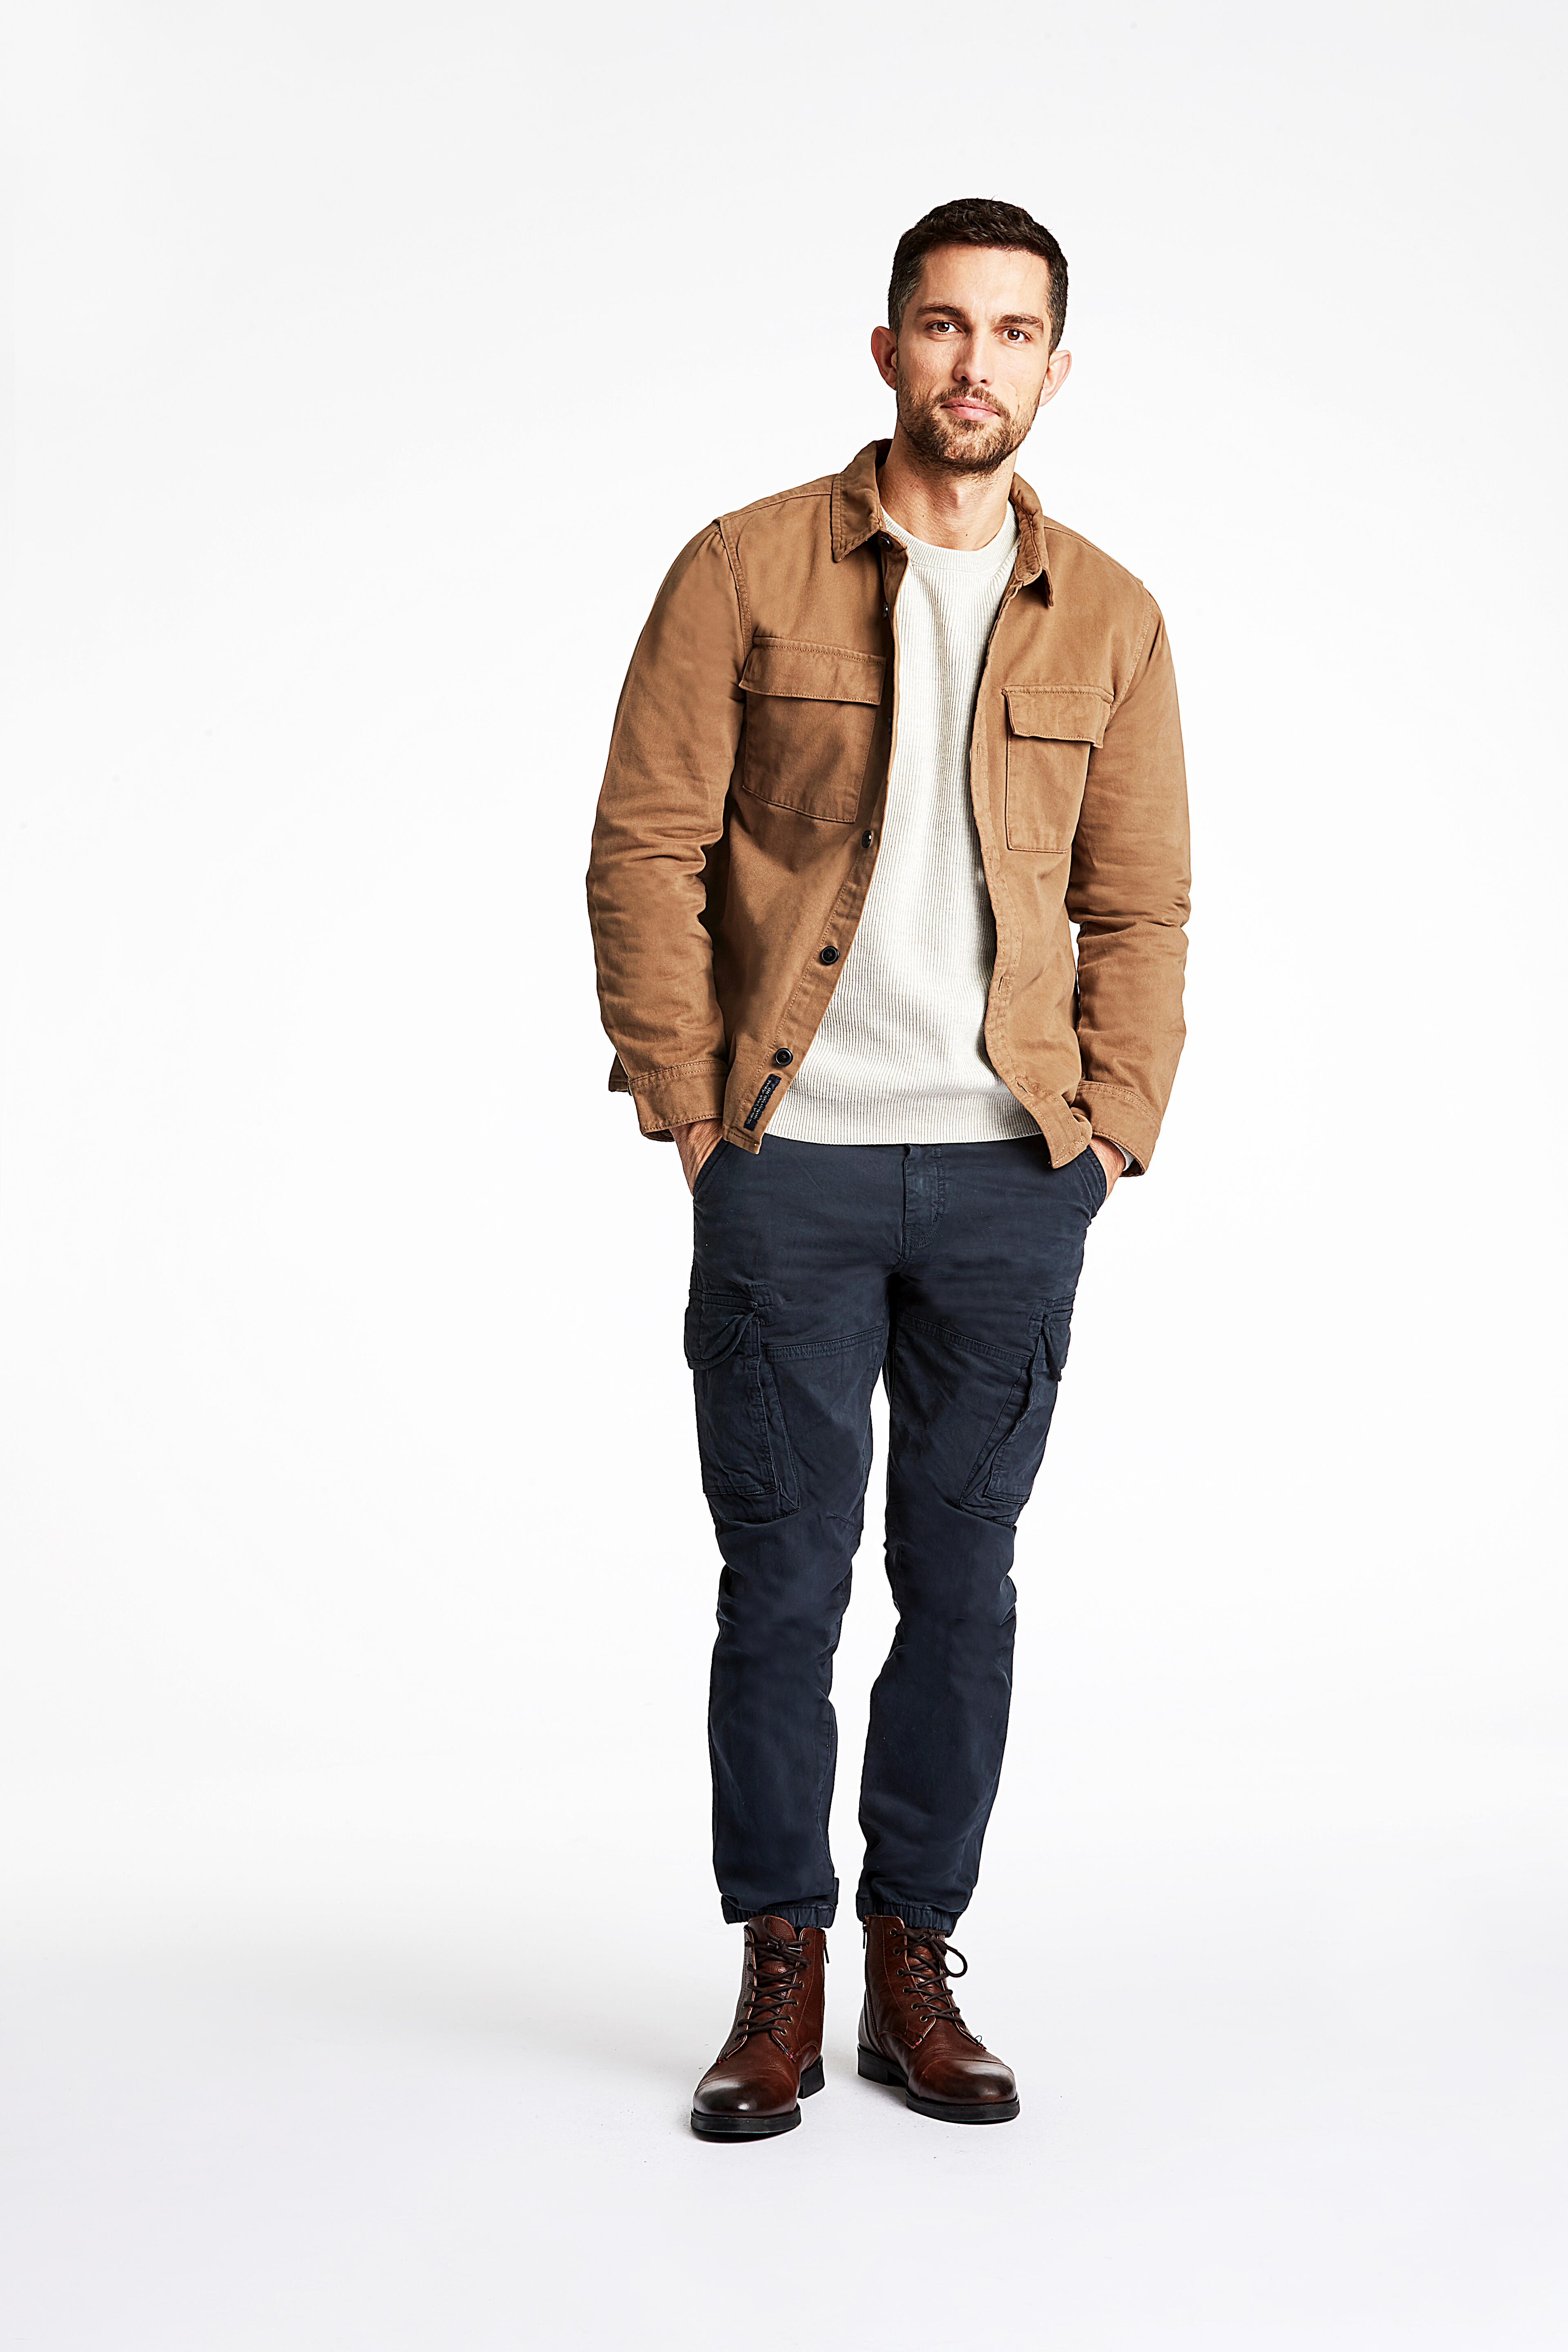 Oberhemd | Relaxed fit 30-220112